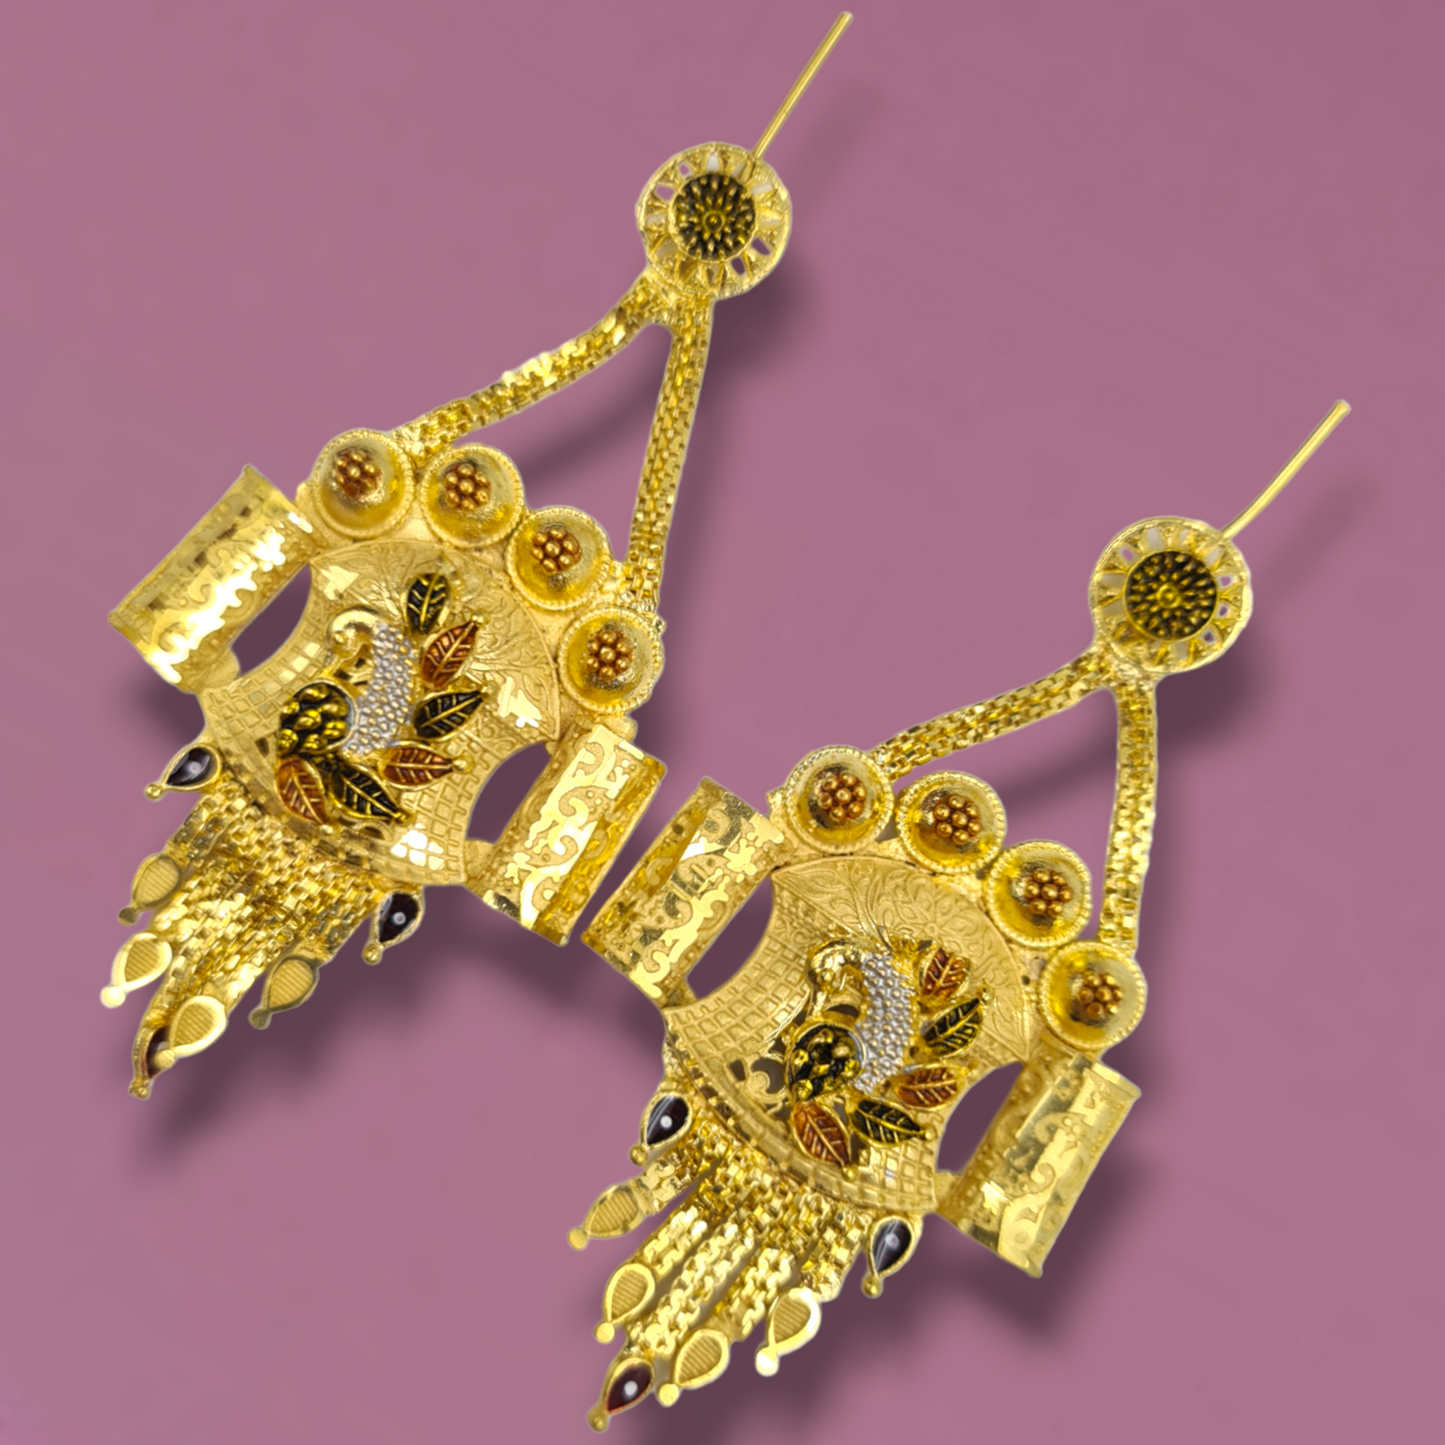 Gold-Plated Earrings with Stunning Crystal"